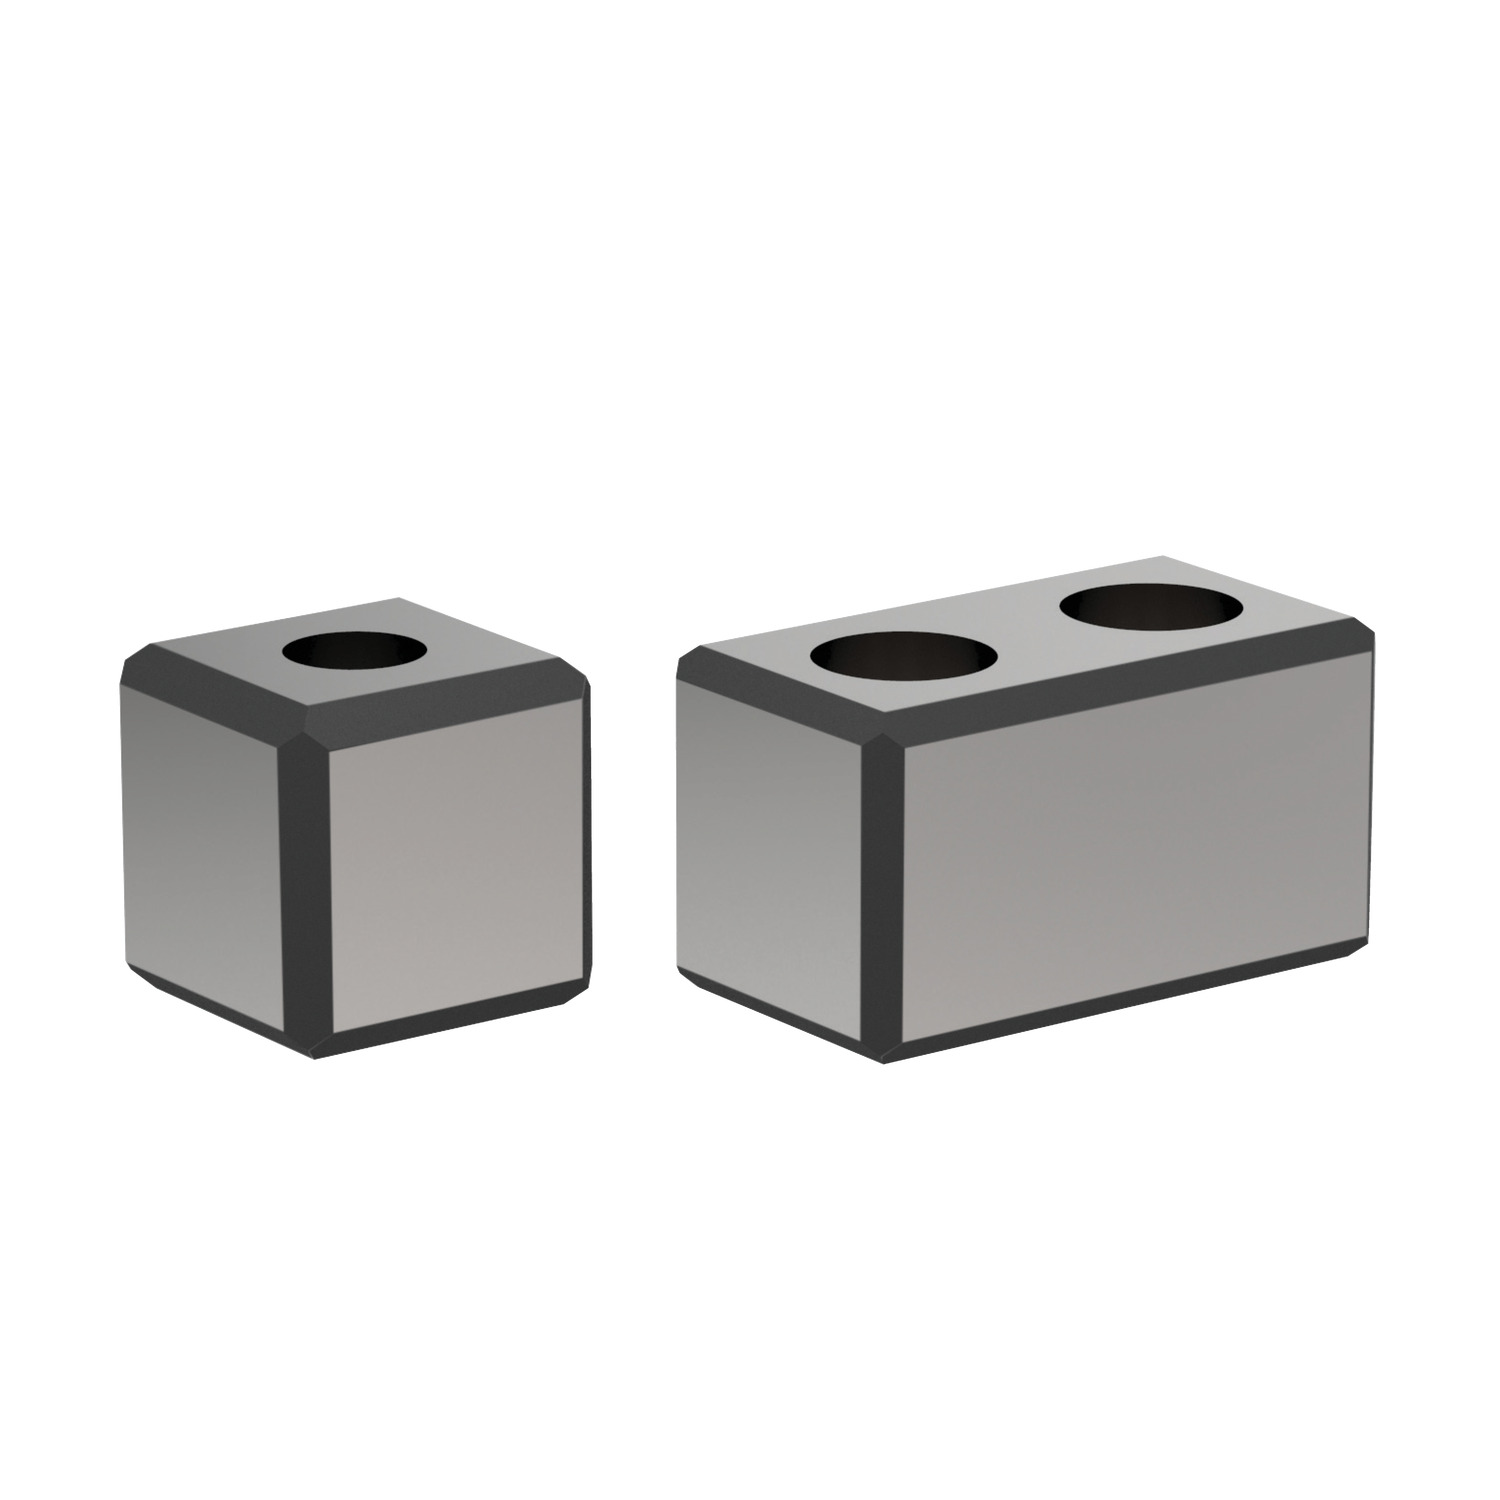 Product 30300, Drive Blocks for machine tool spindles / 